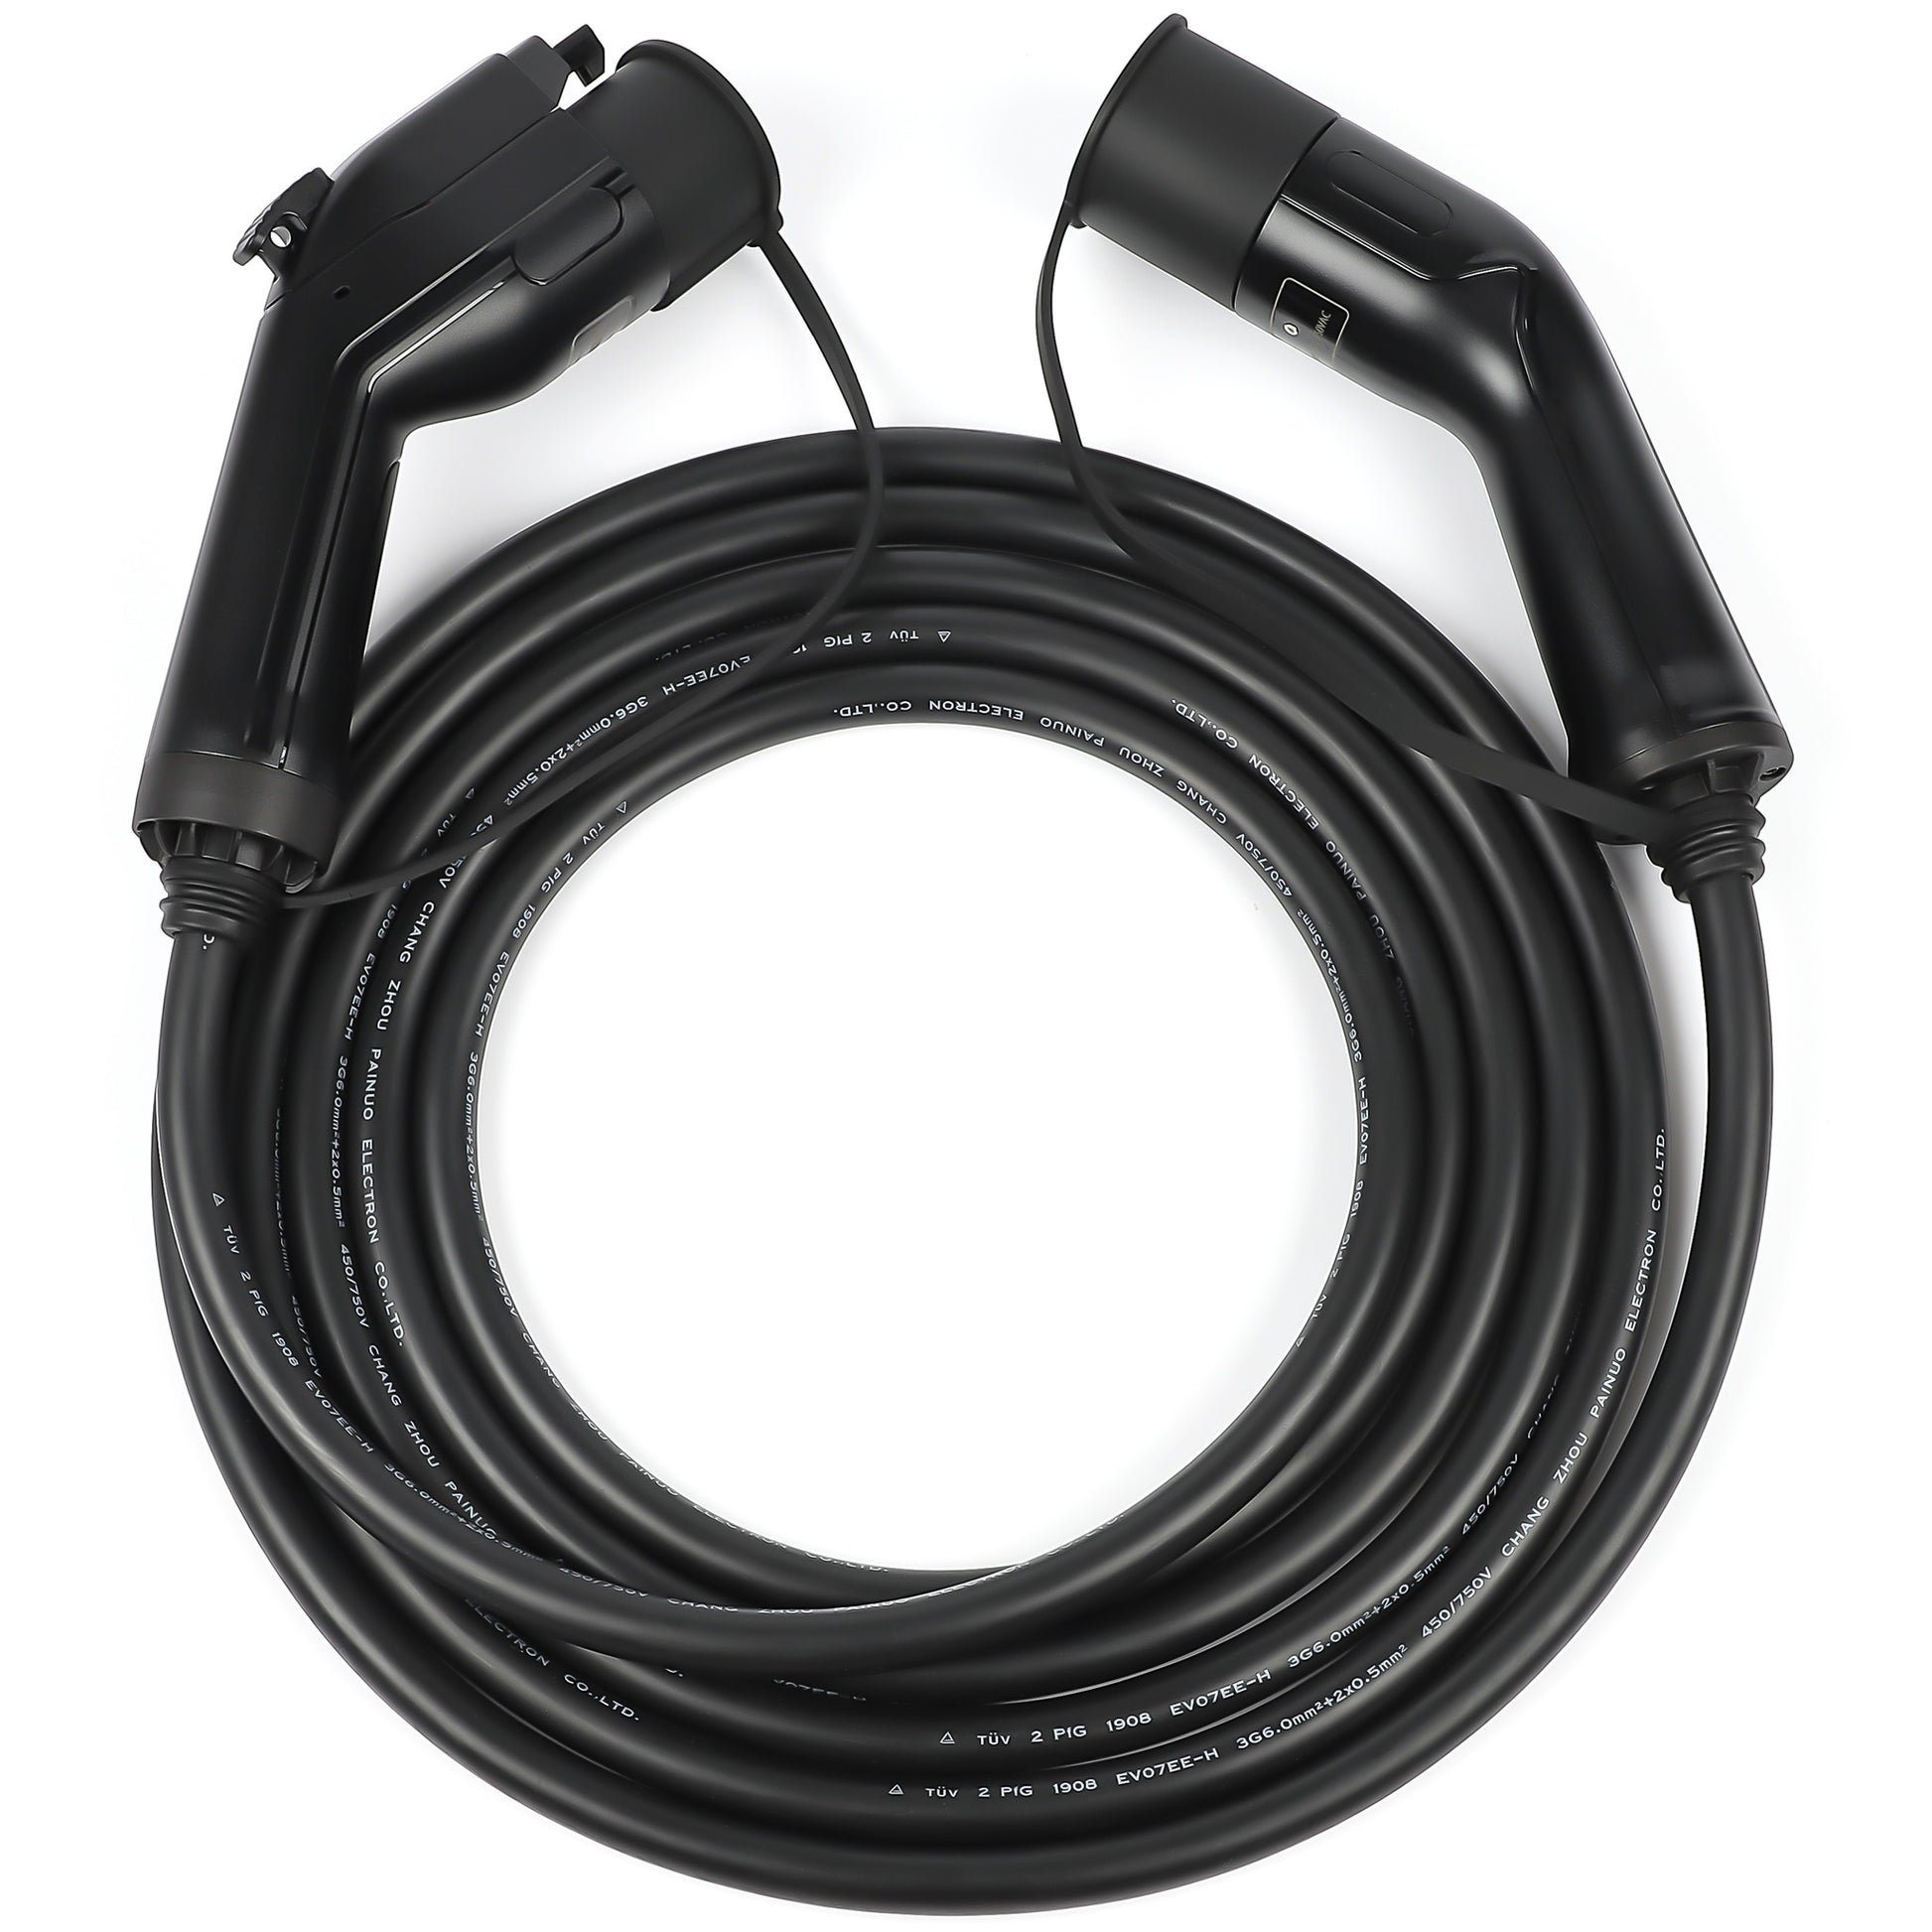 Coiled Charging Cable: Type 2 to Type 2, 5m/7m/10m